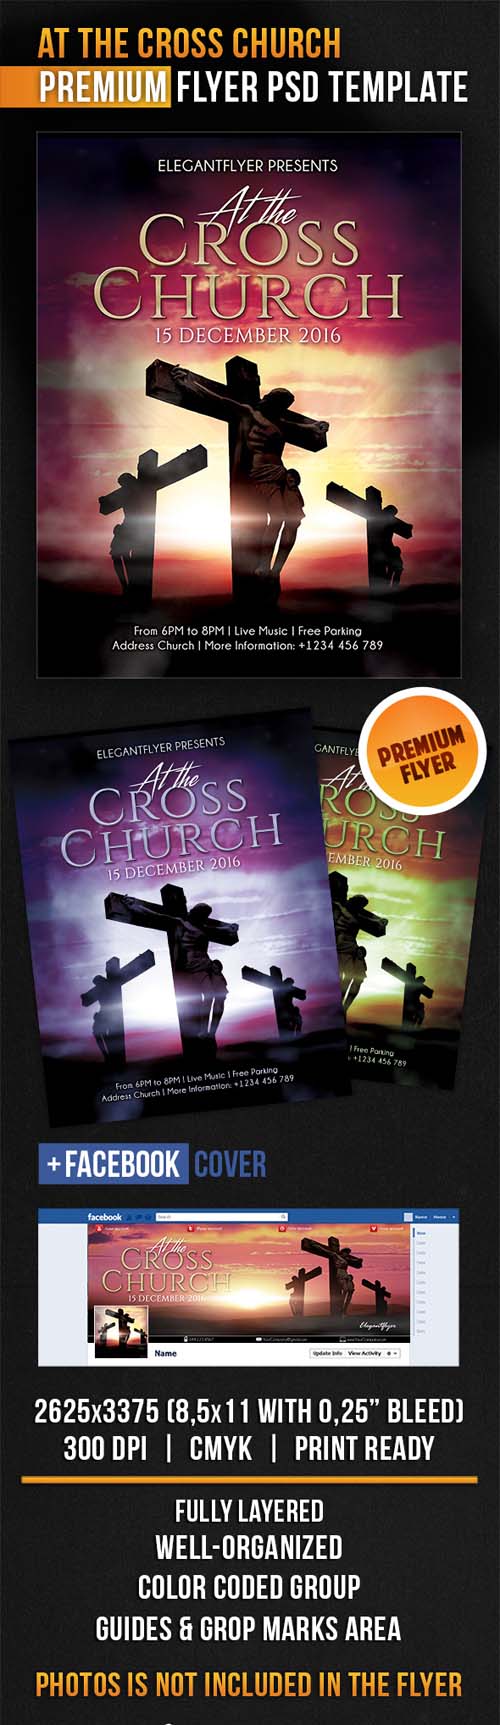 Flyer PSD Template - At the Cross Church + Facebook Cover 5